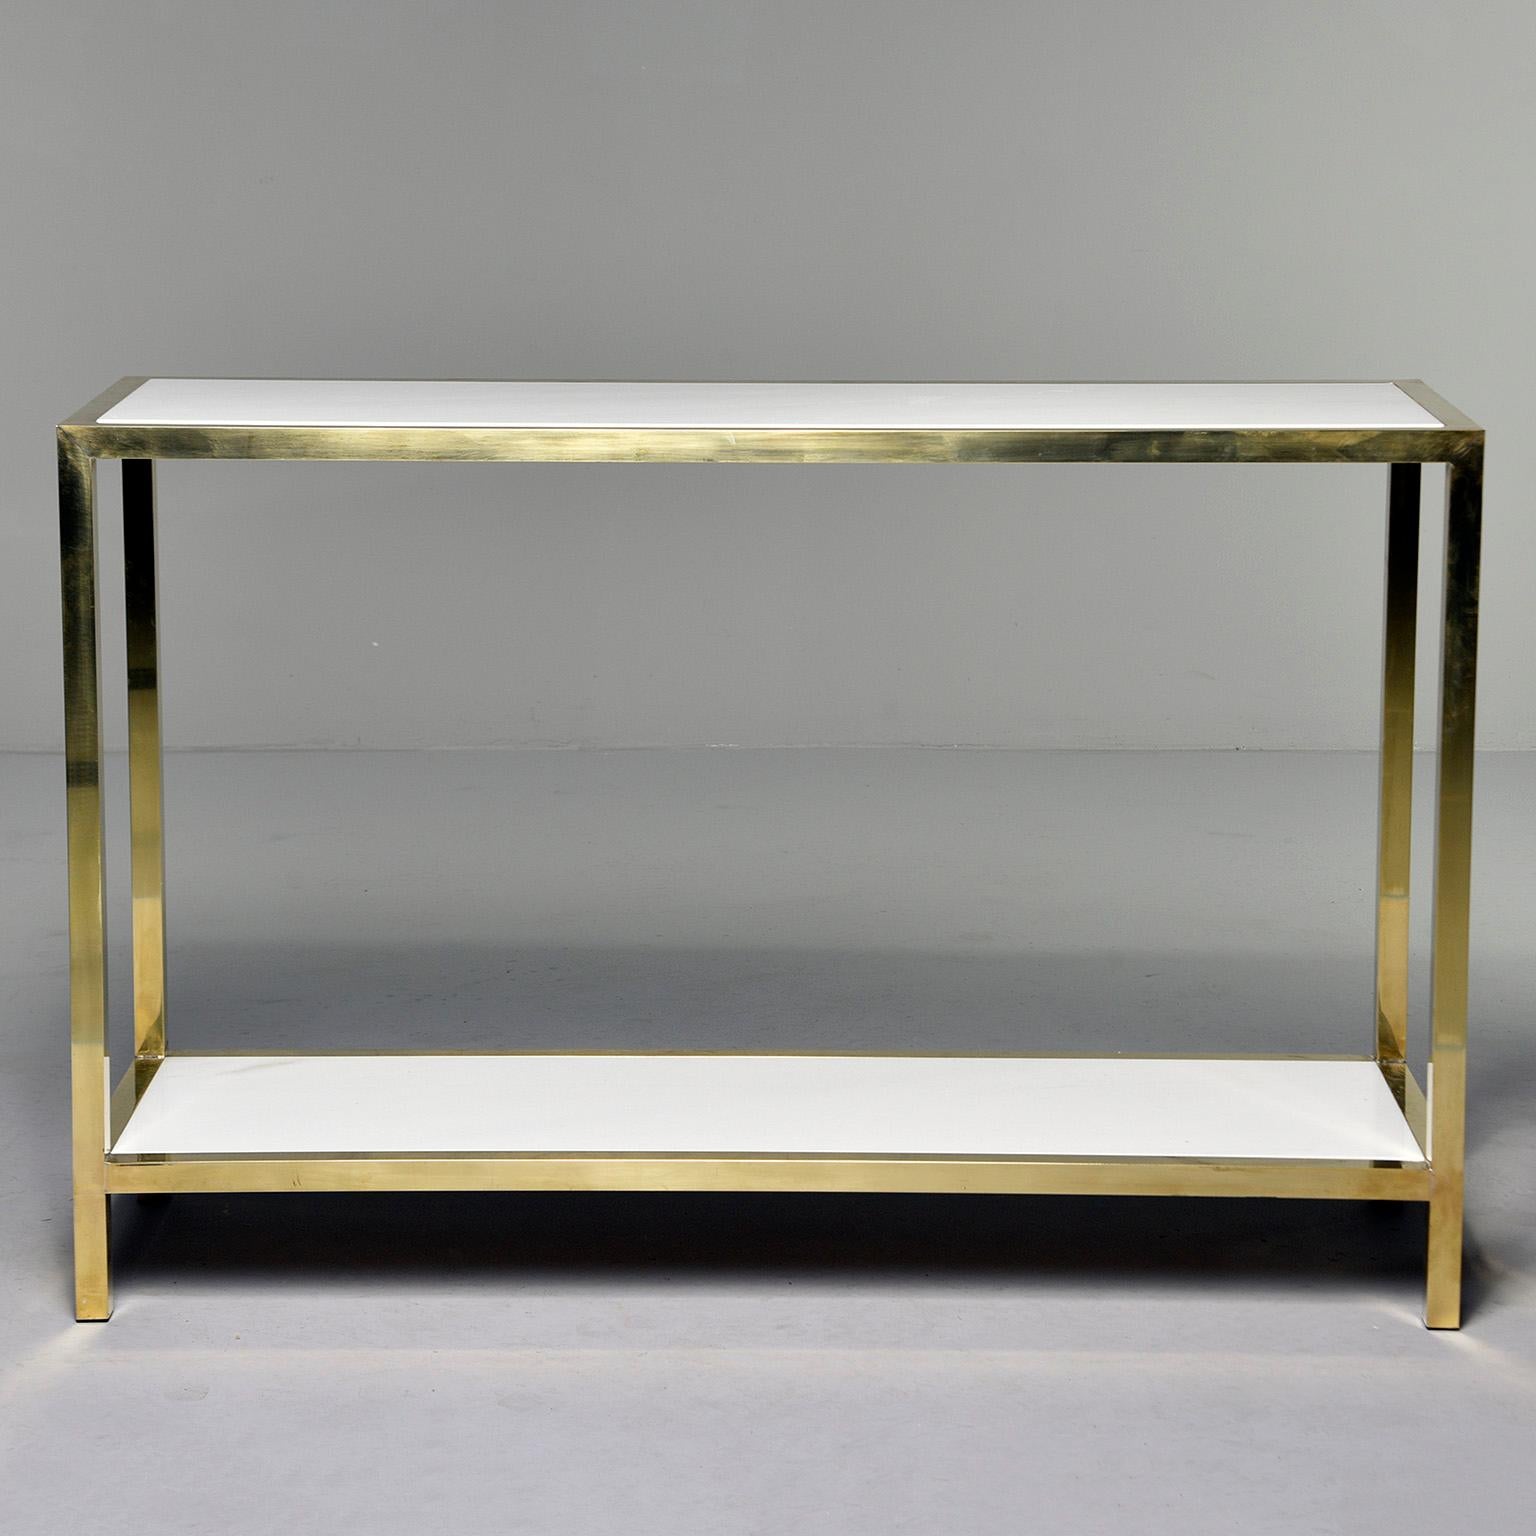 Found in Italy and presumed to be Italian made, this circa 2010 console table has Classic lines with a polished brash frame and two tiers of Italian white marble. Two consoles of this style and size available at the time of this posting. Sold and